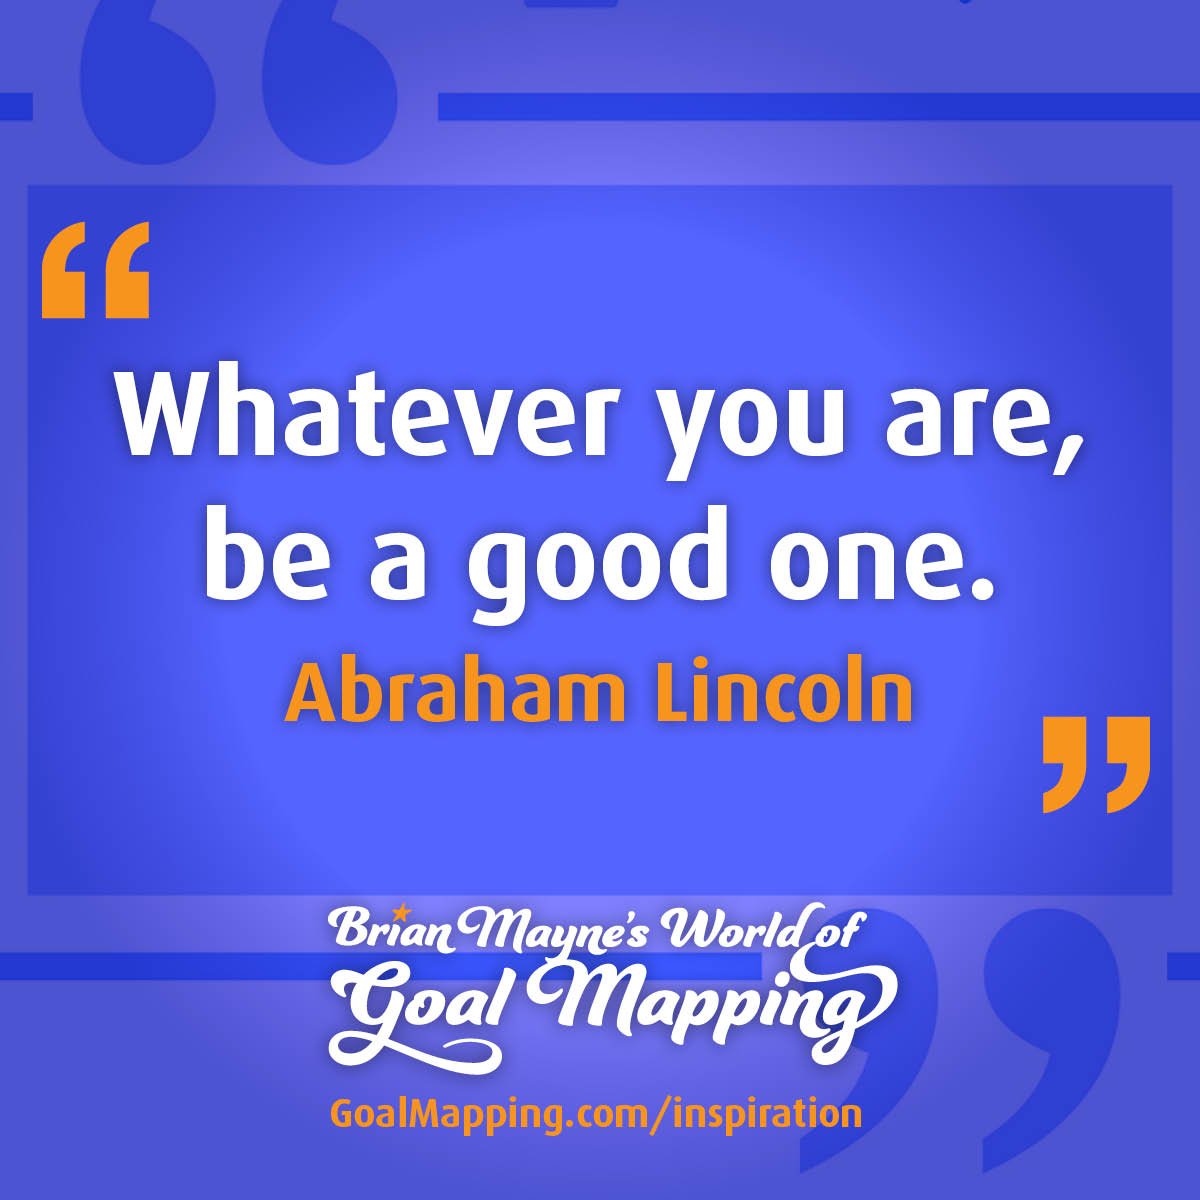 "Whatever you are, be a good one." Abraham Lincoln